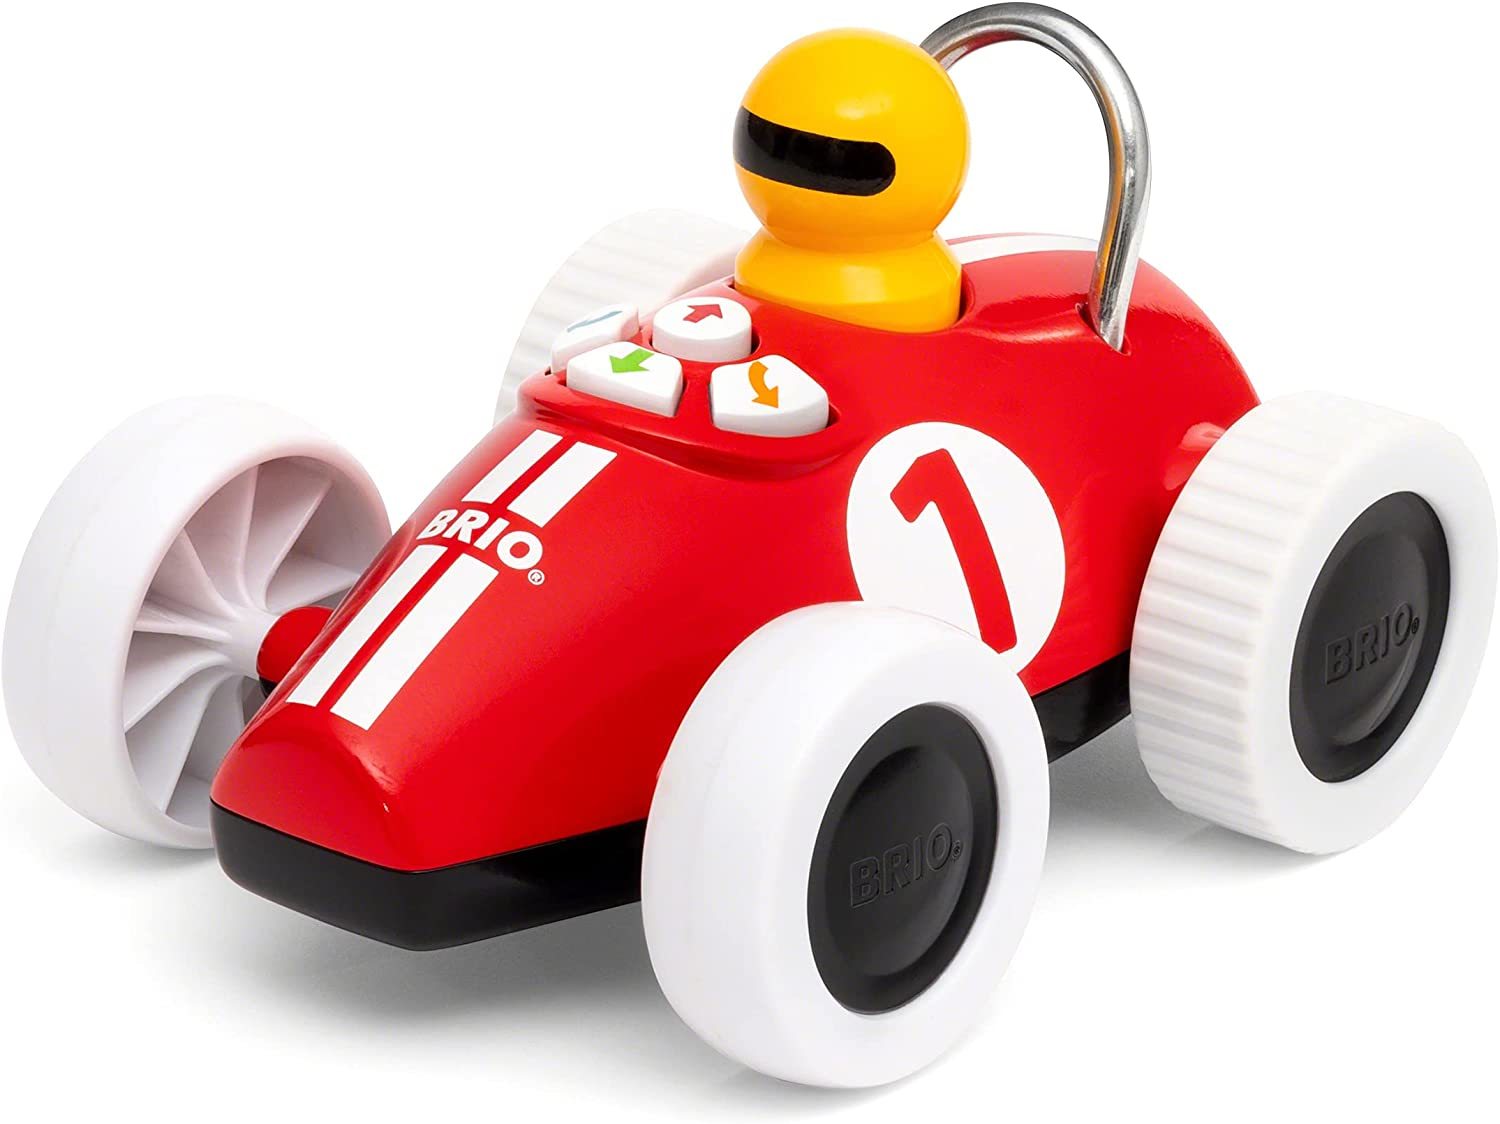 Brio Play and Learn Action Racer Car